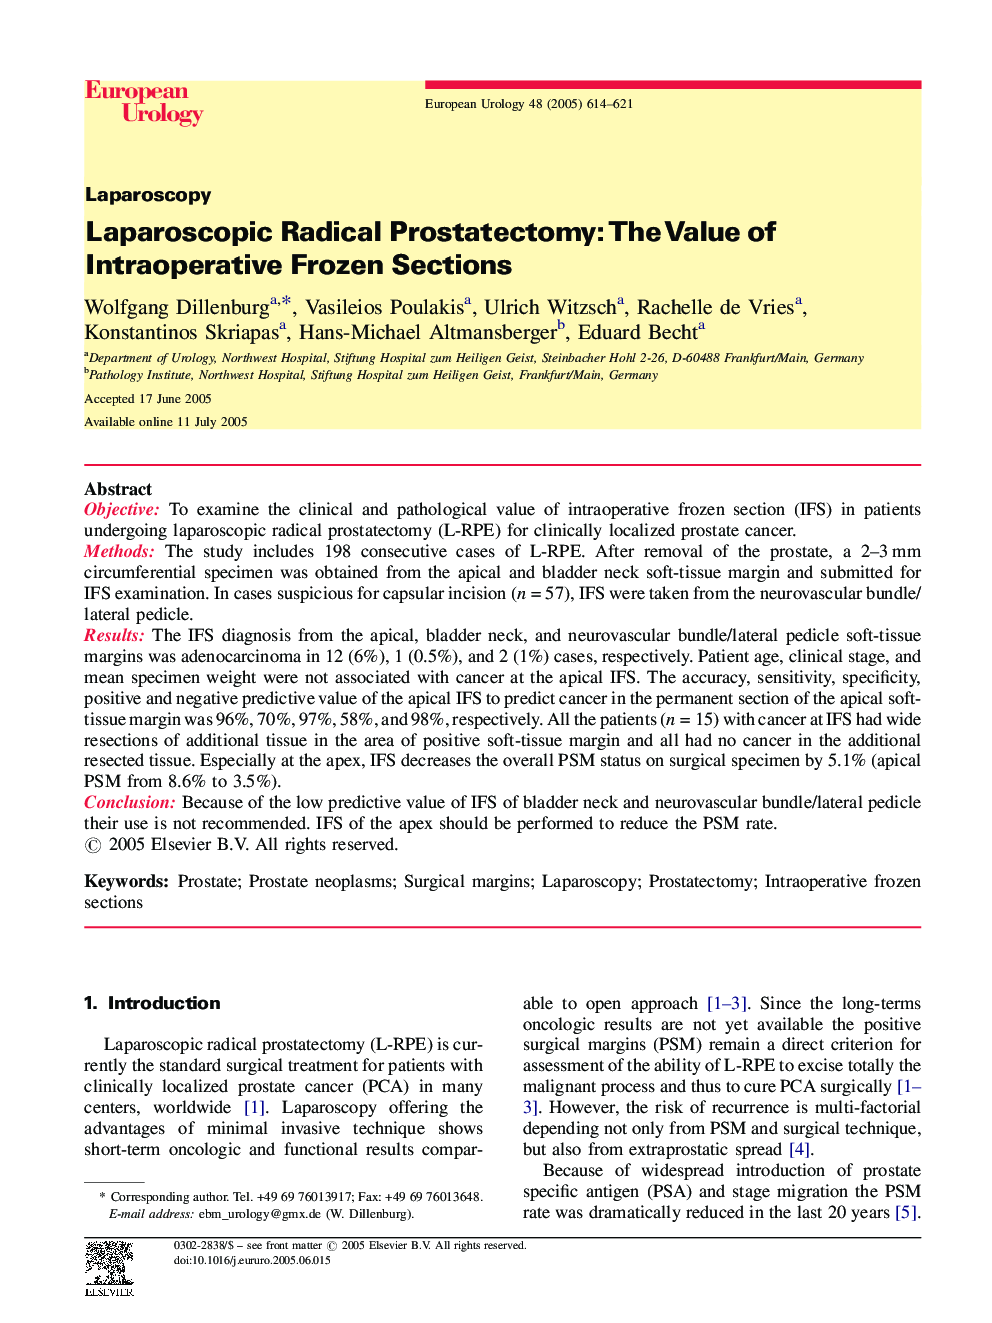 Laparoscopic Radical Prostatectomy: The Value of Intraoperative Frozen Sections